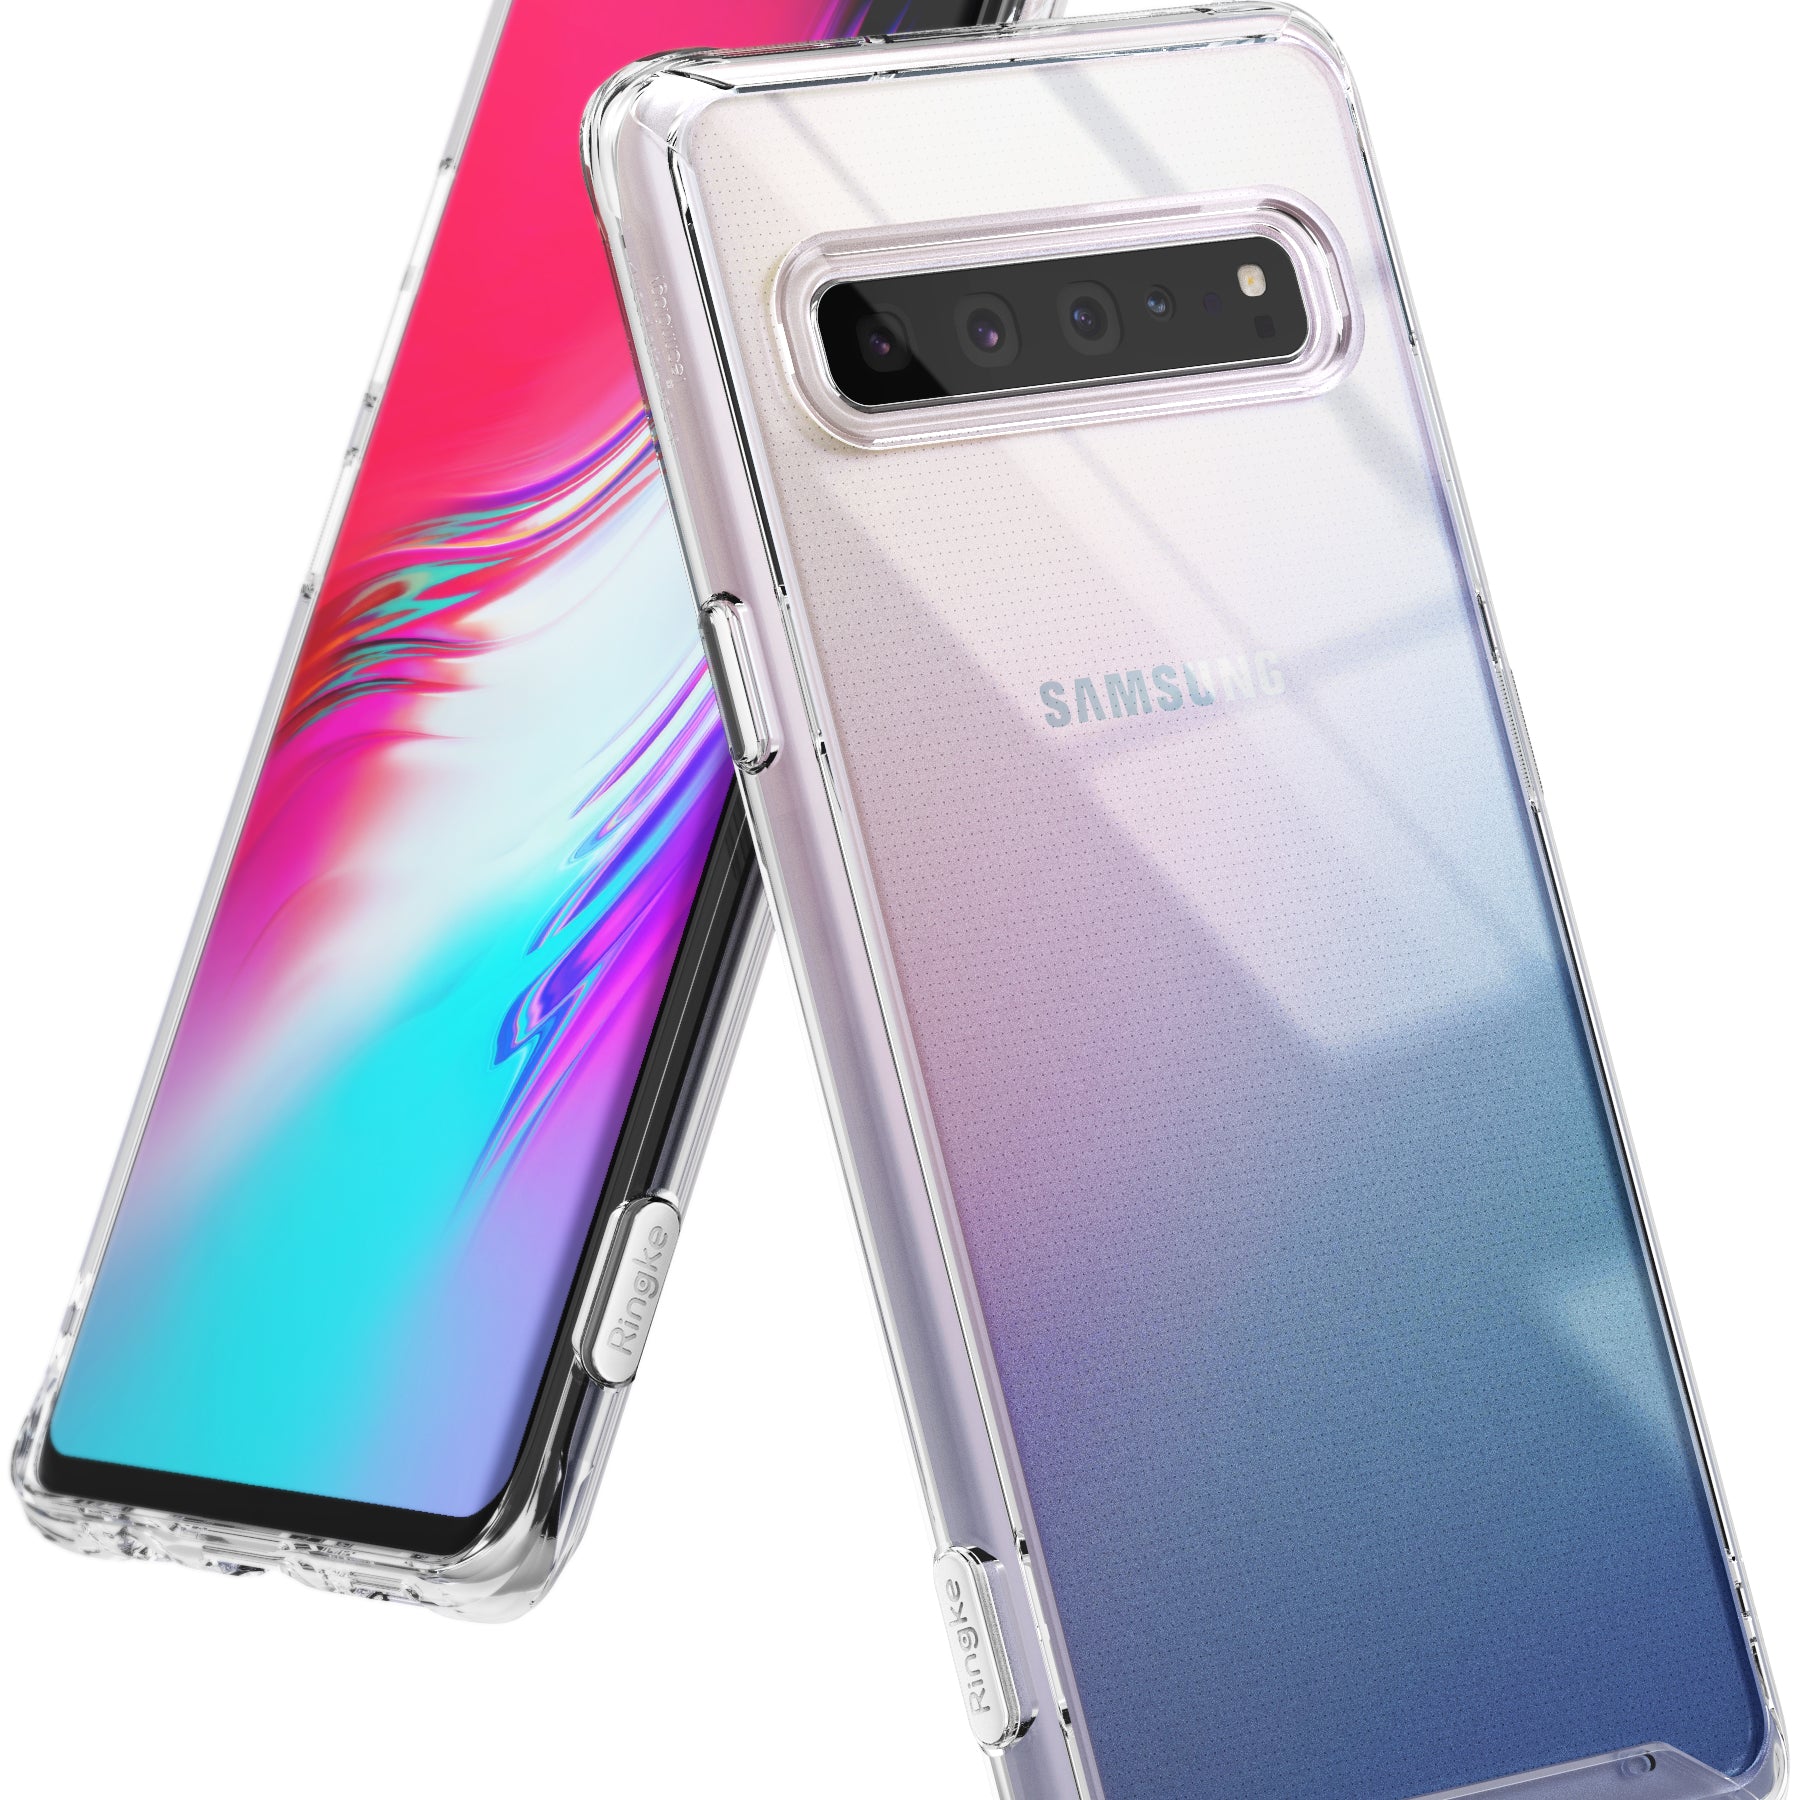 ringke fusion case for samsung galaxy s10 5g - clear